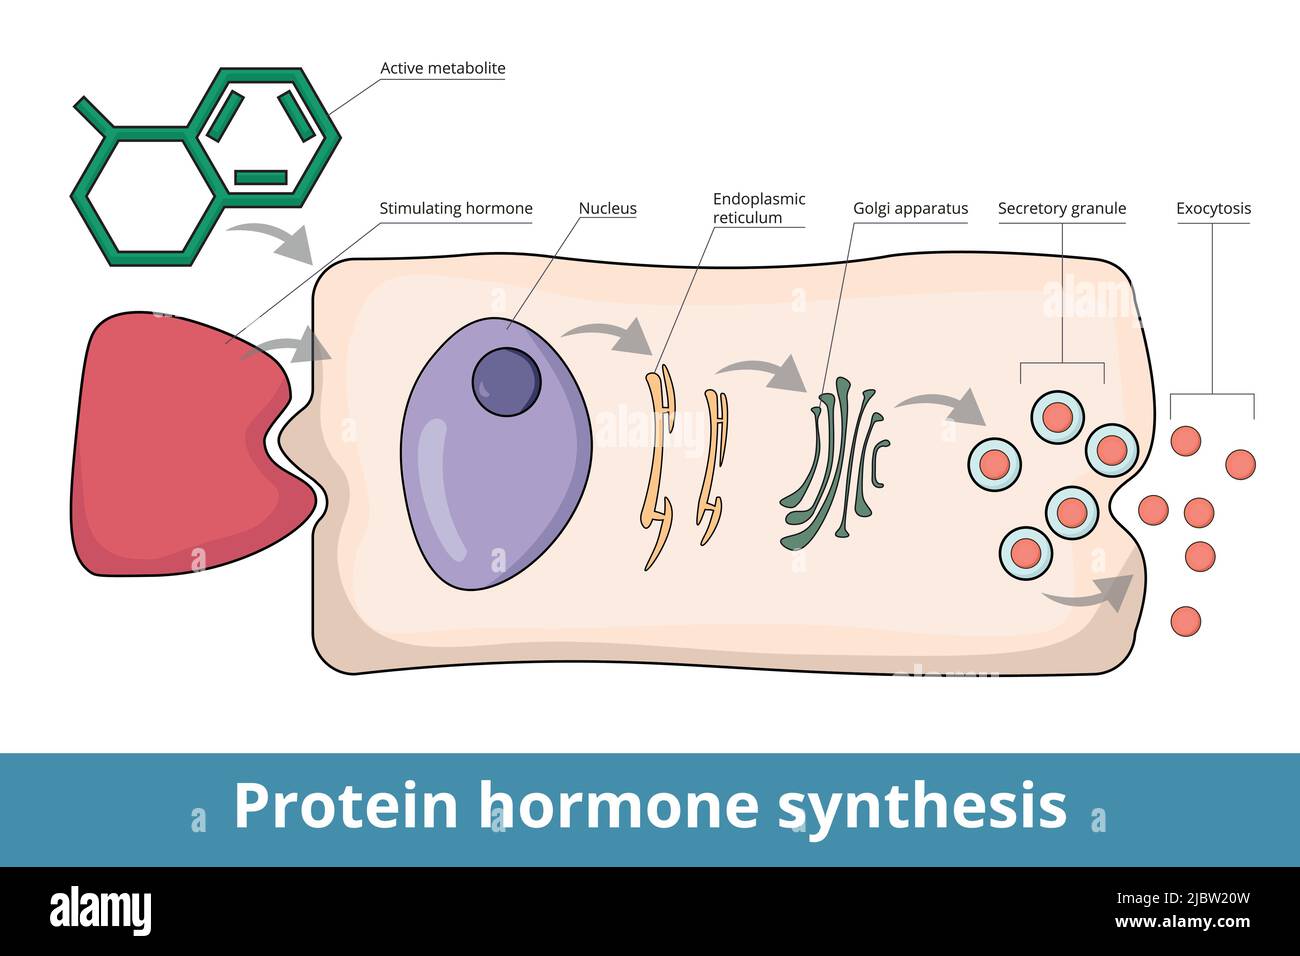 Process of protein hormone synthesis. Typical endocrine cell. Hormone or active metabolite stimulates receptor. Prohormone is transported through cell Stock Vector